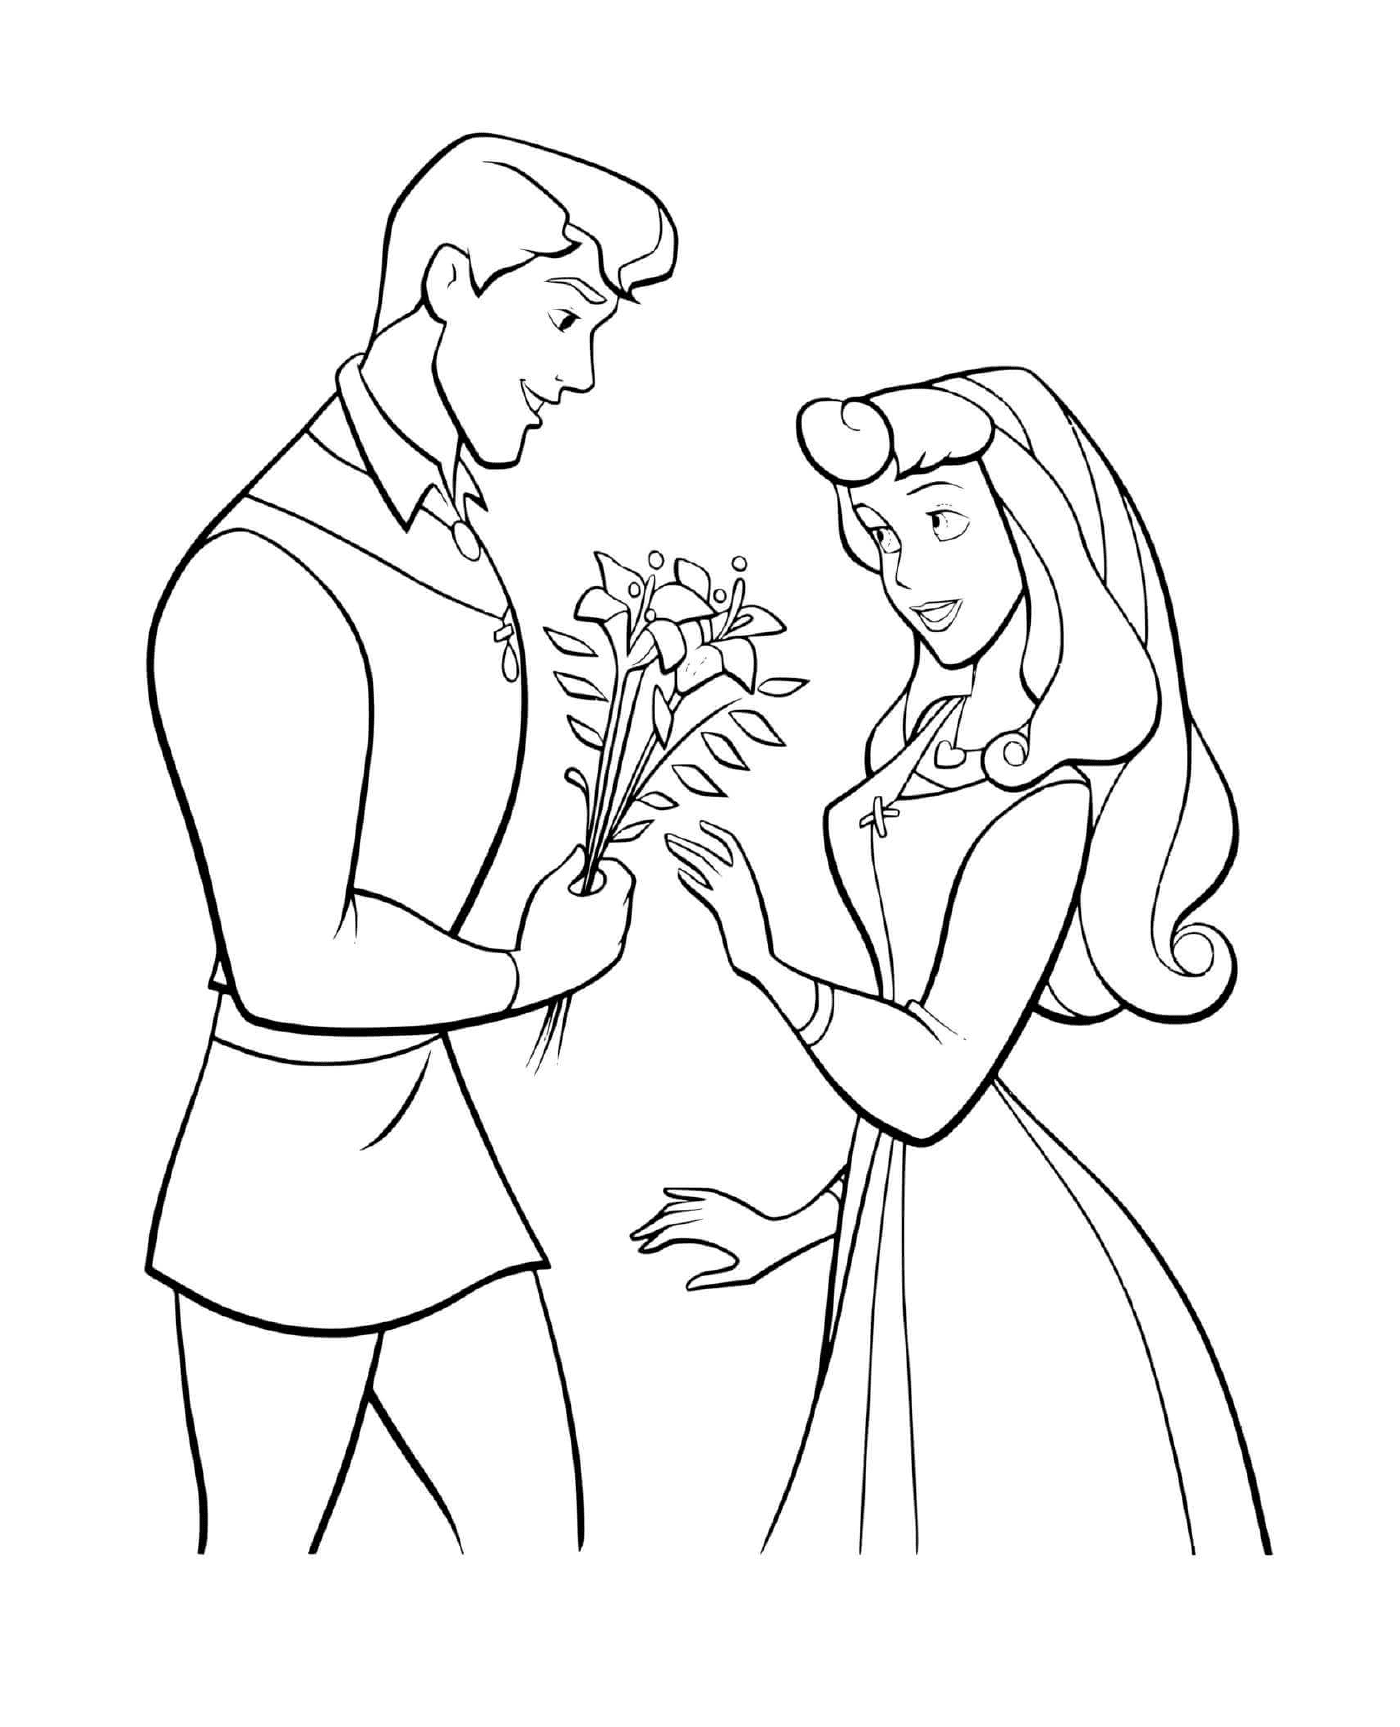  A man and a woman holding flowers 